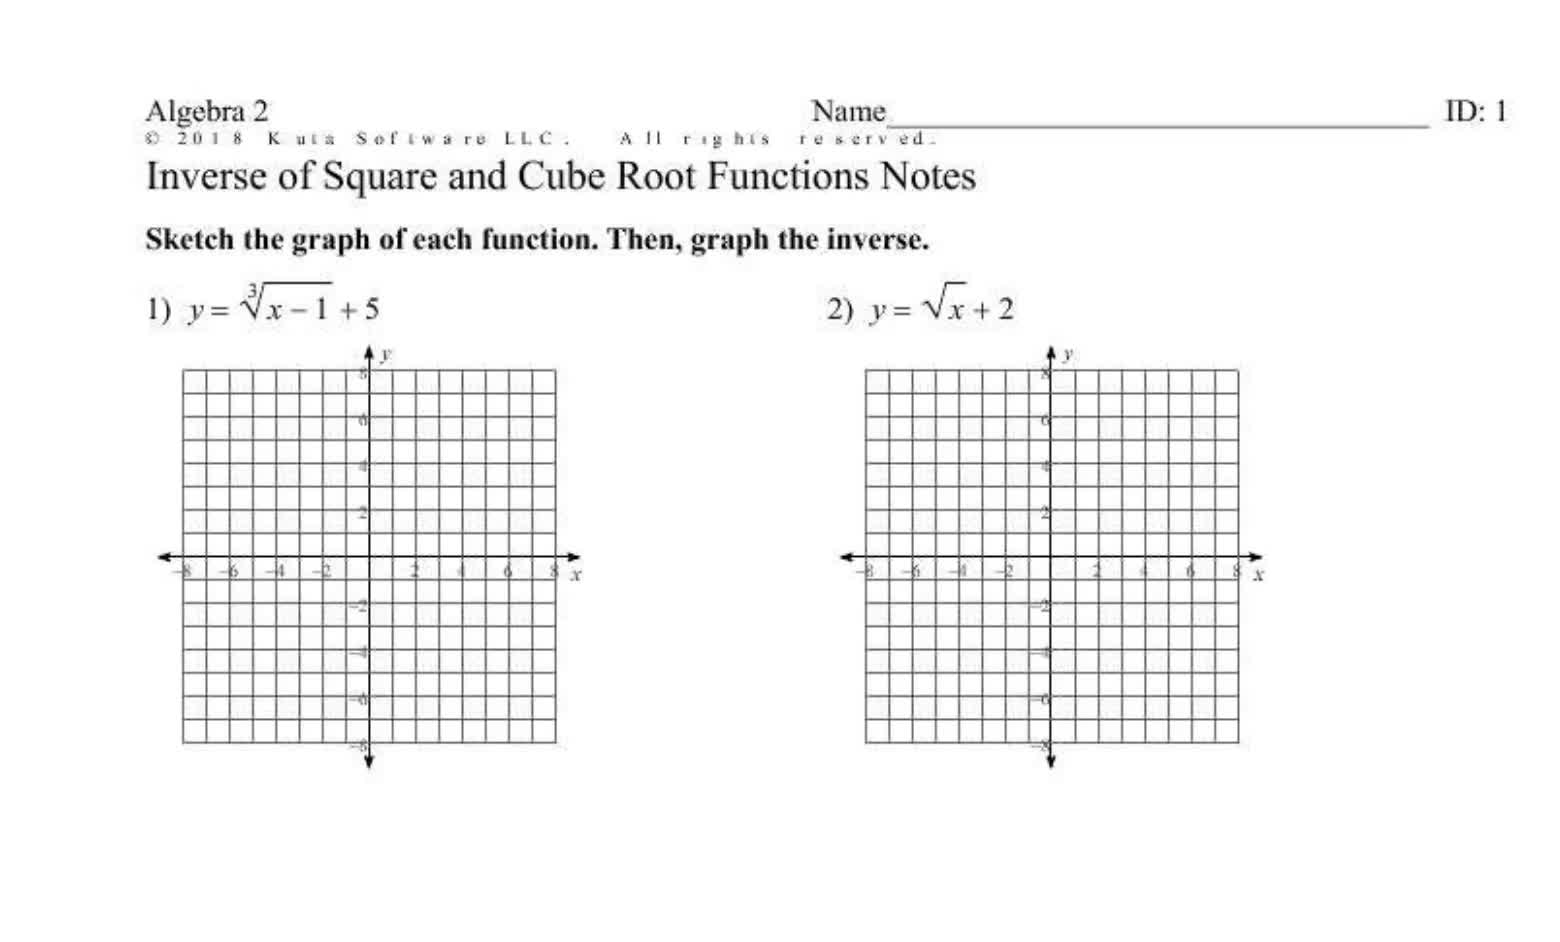 Inverse of Square and Cube Root Functions